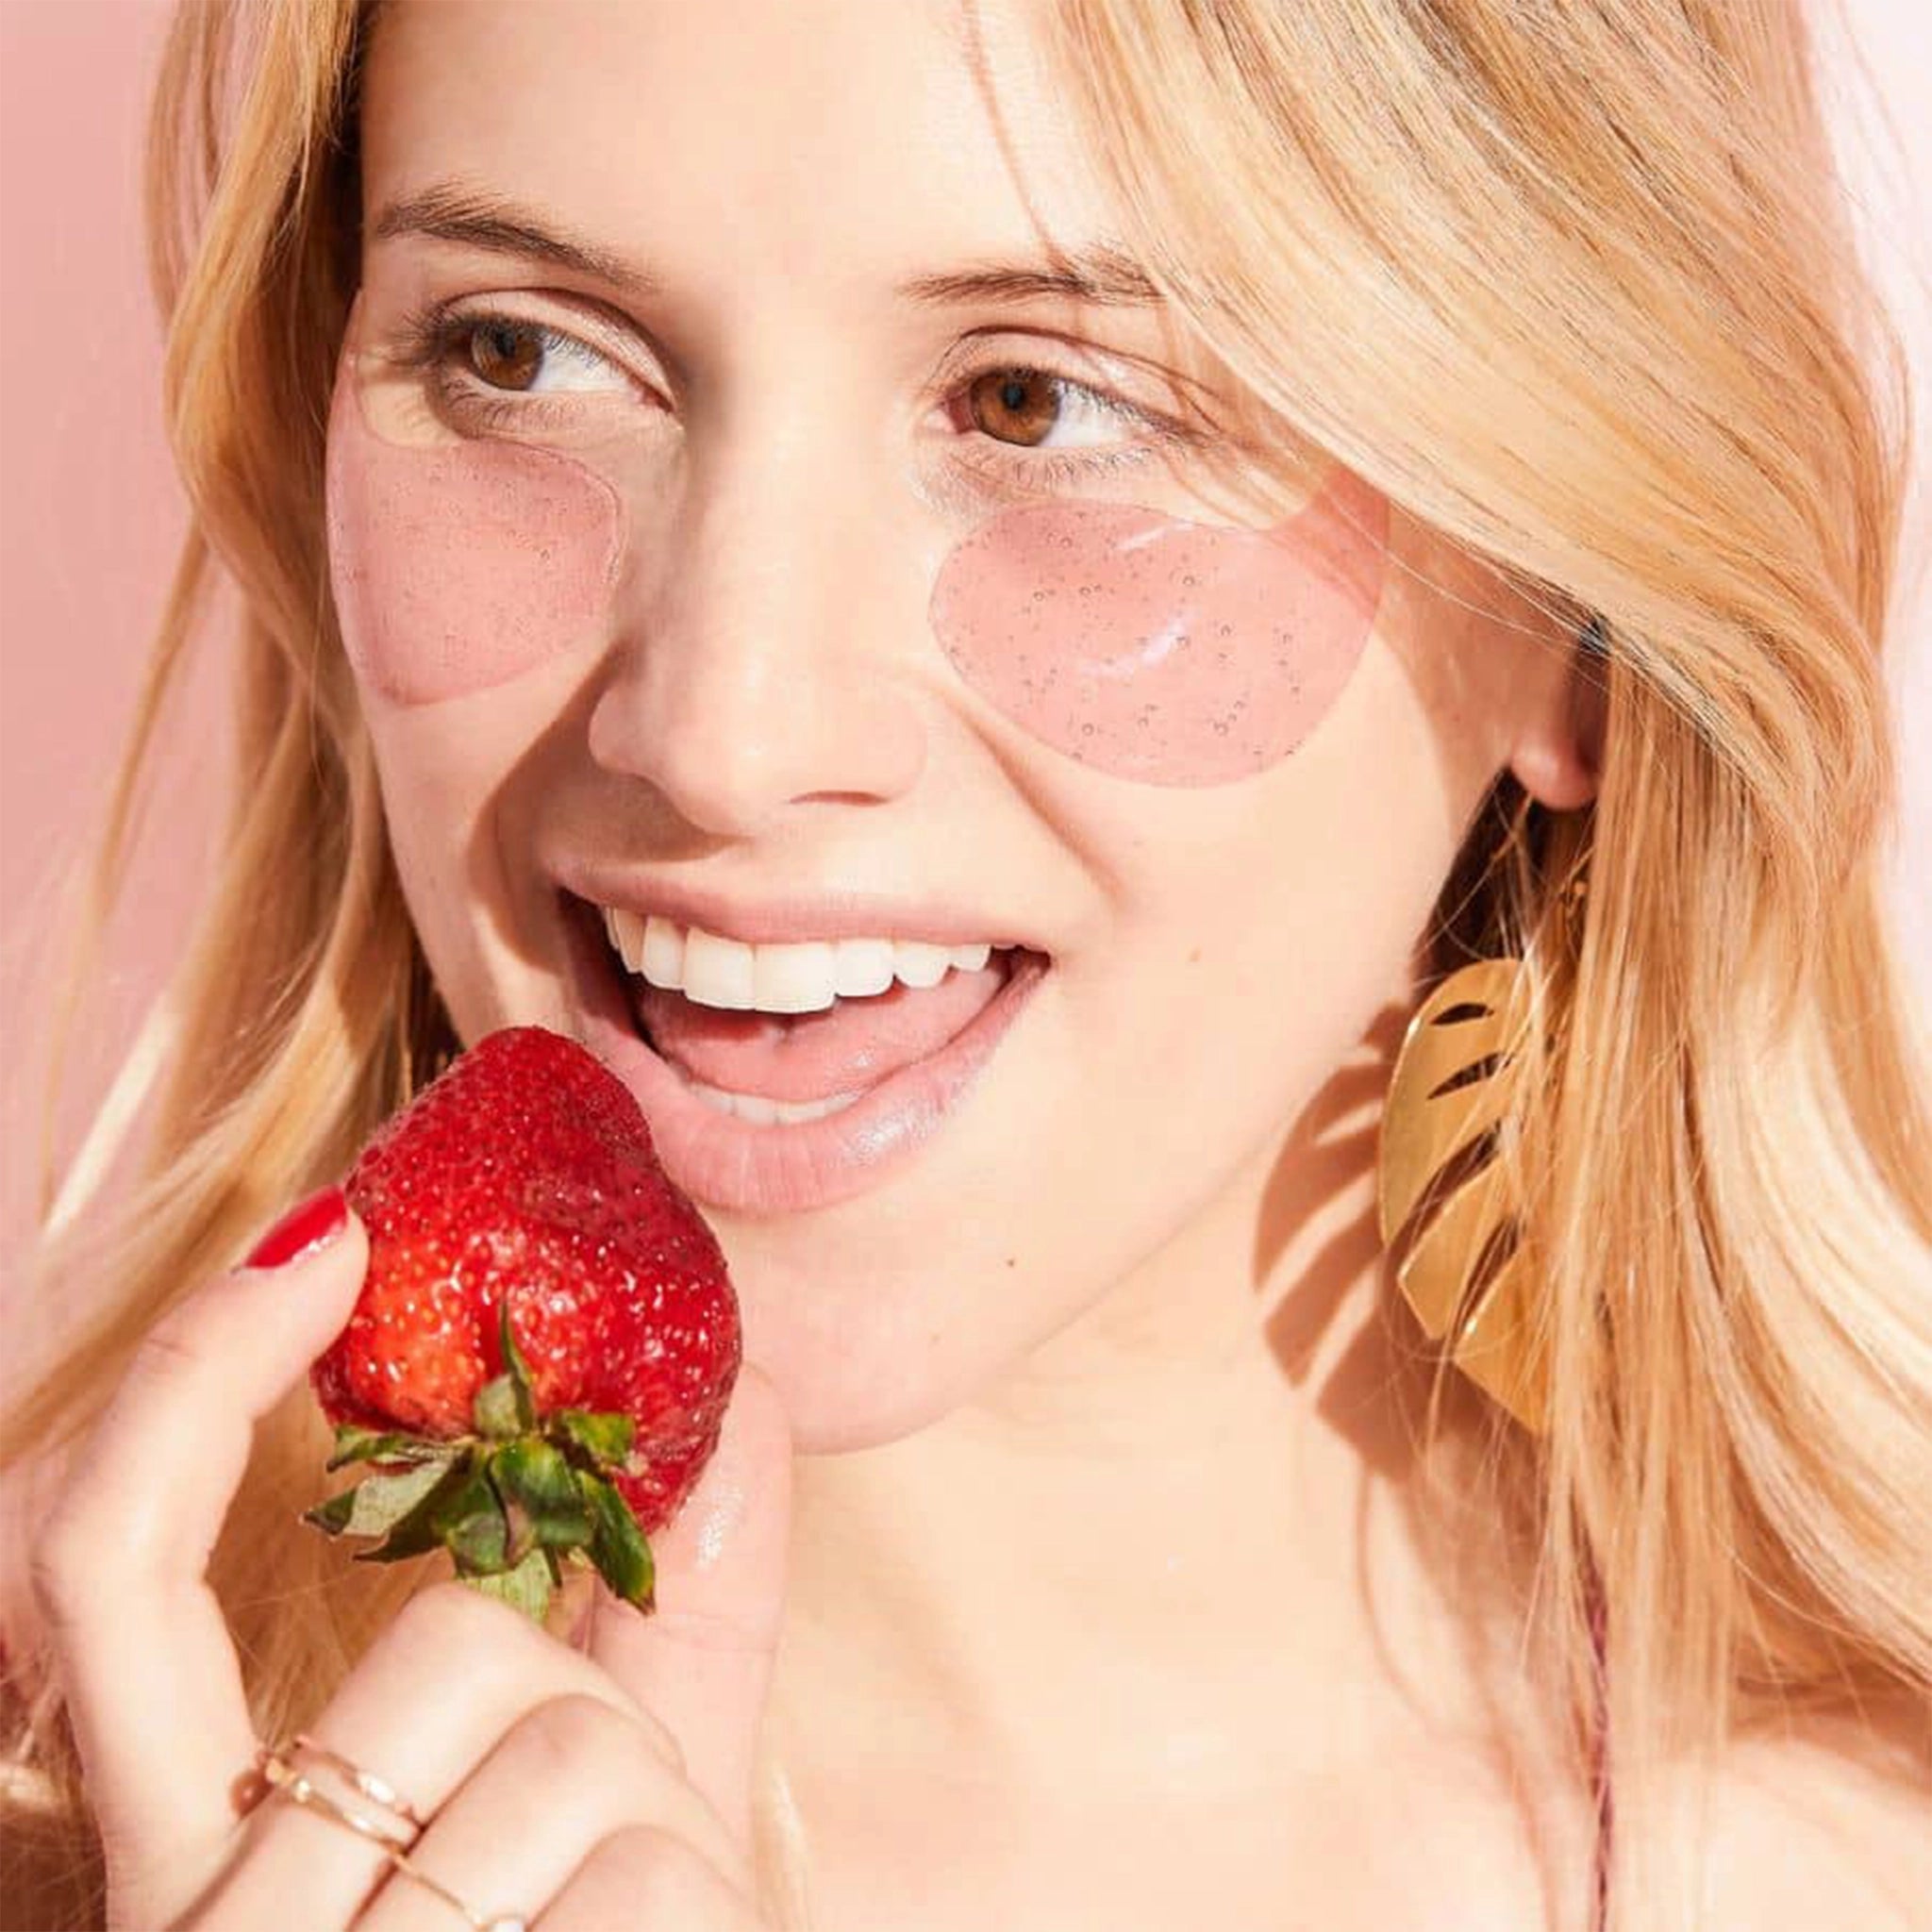 A model wearing the pink gel under eye masks while eating a strawberry.